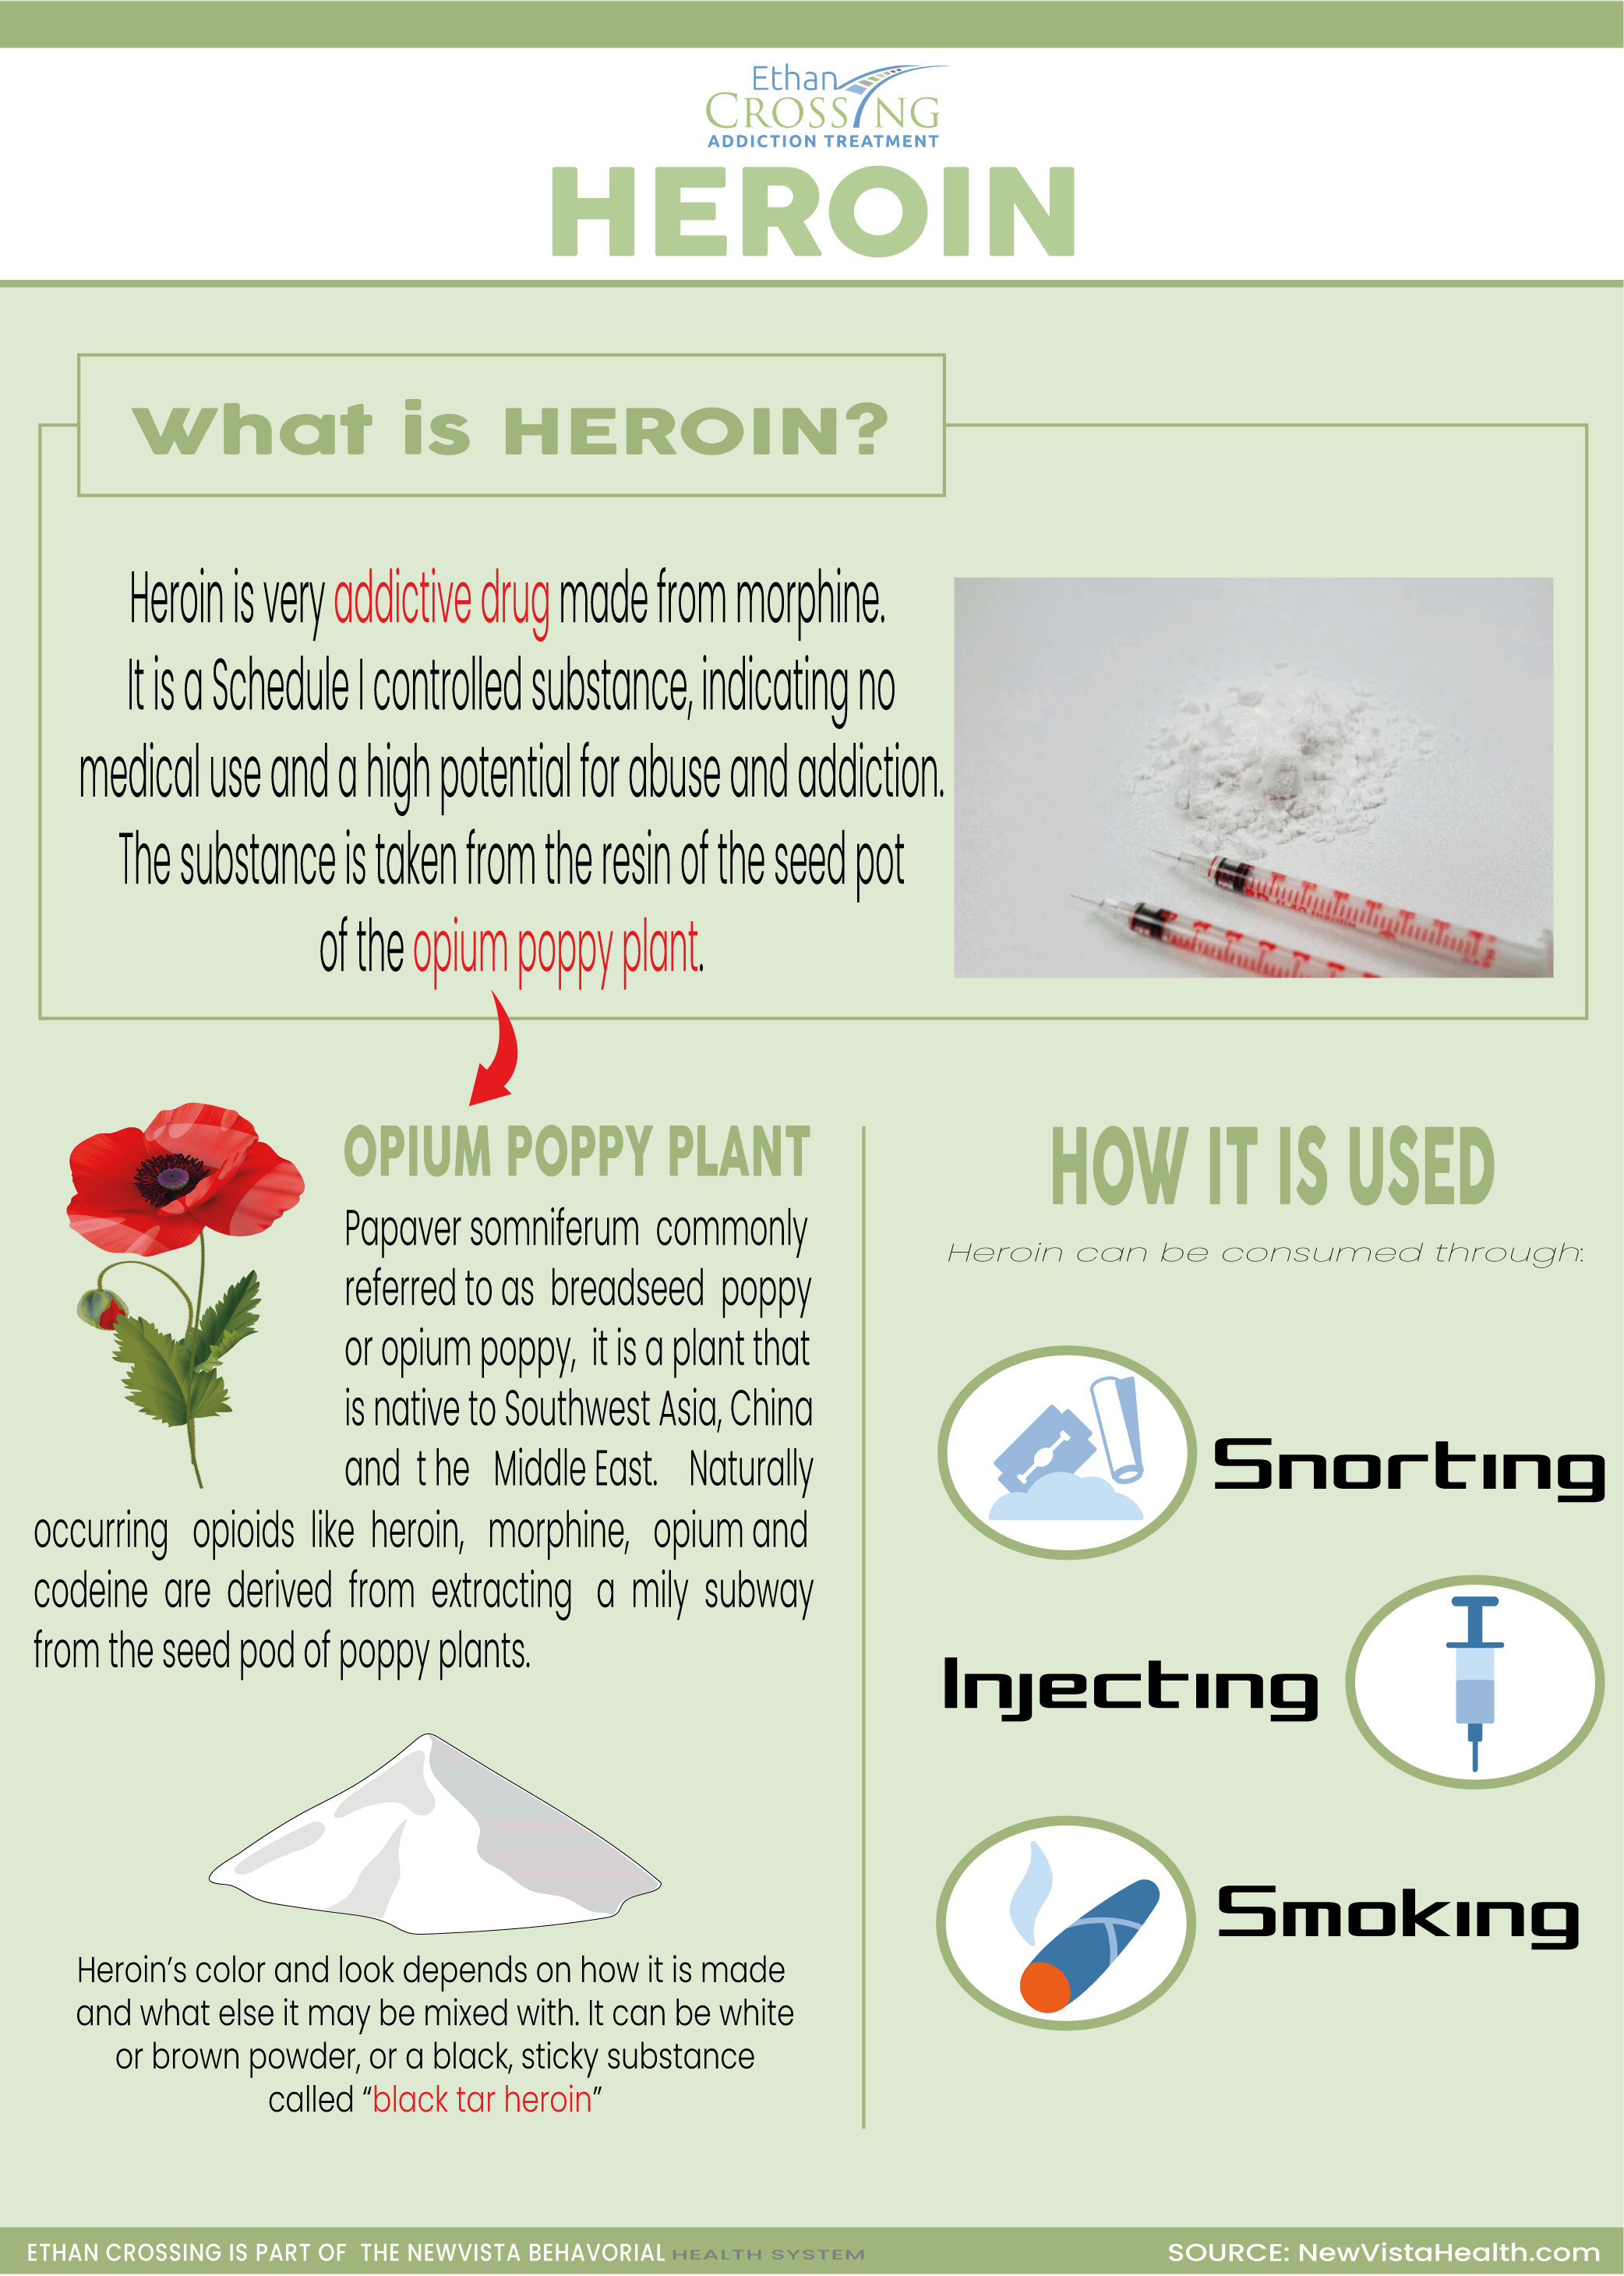 What is Heroin